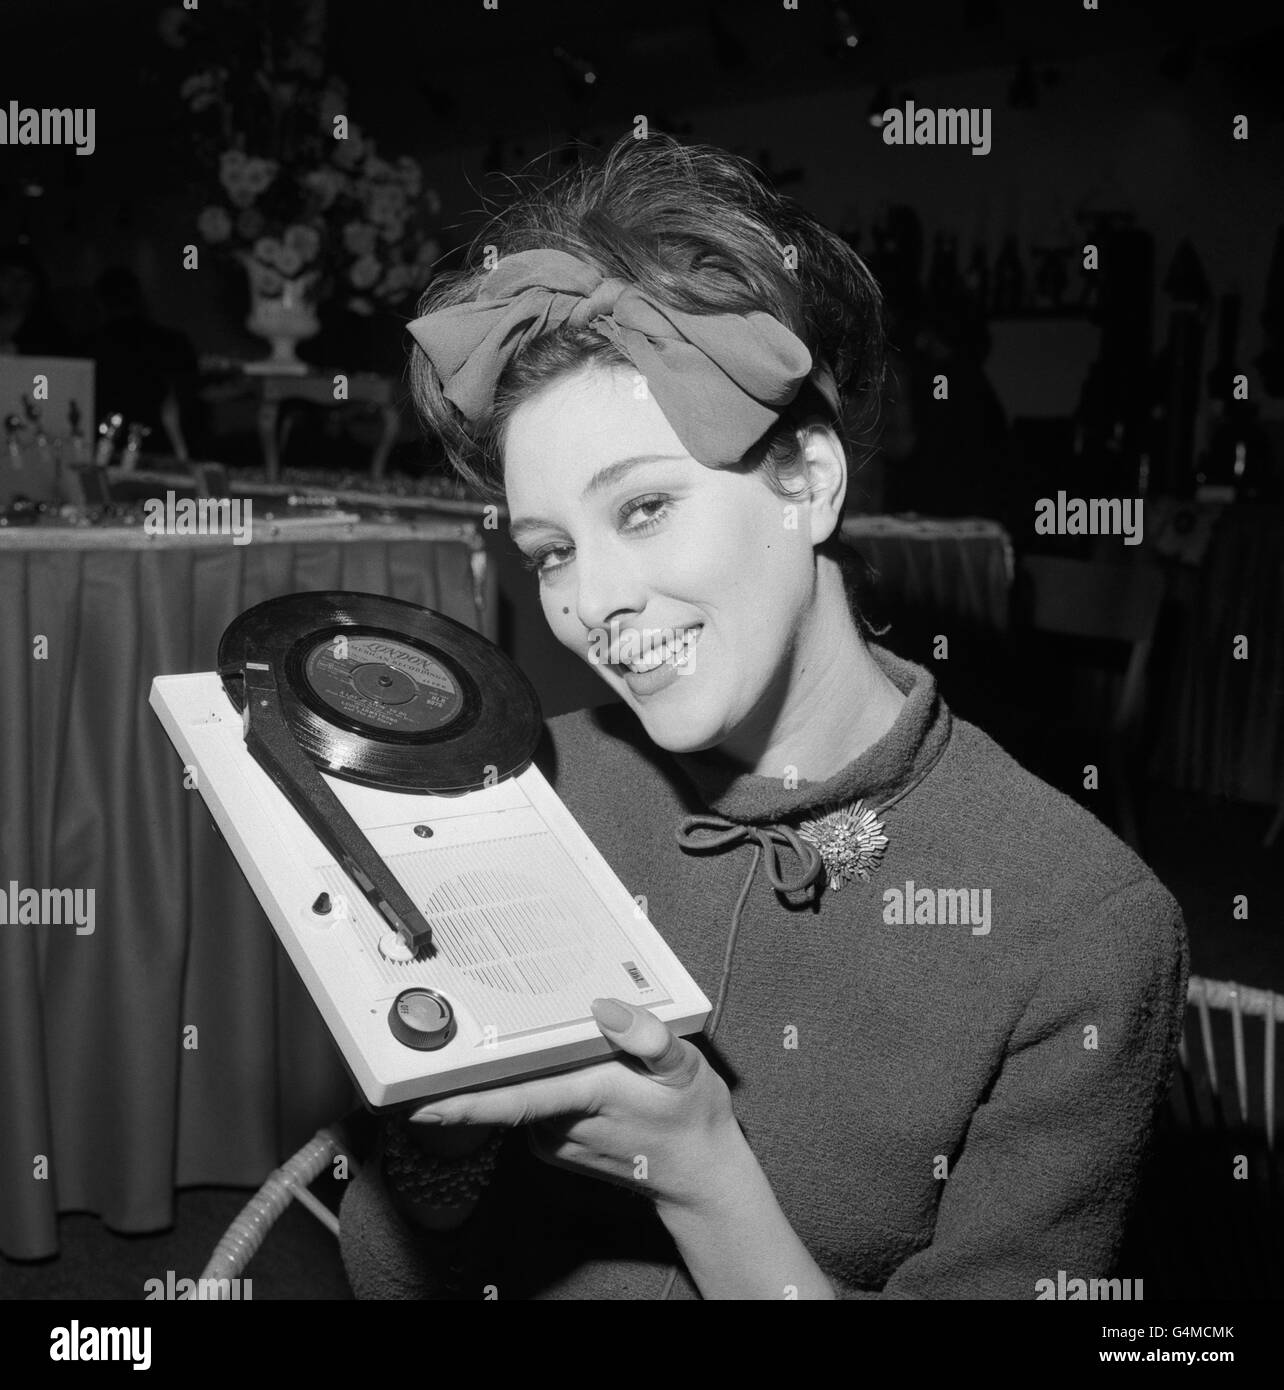 British actress Sue Lloyd, who has just finished her first film role in the spy drama 'The Ipcress File', which also stars Michael Caine, is seen holding a fully transistorised record player at Giftex International Gift and Fancy Goods Exhibition, held at the Alexandra Palace, London. Stock Photo